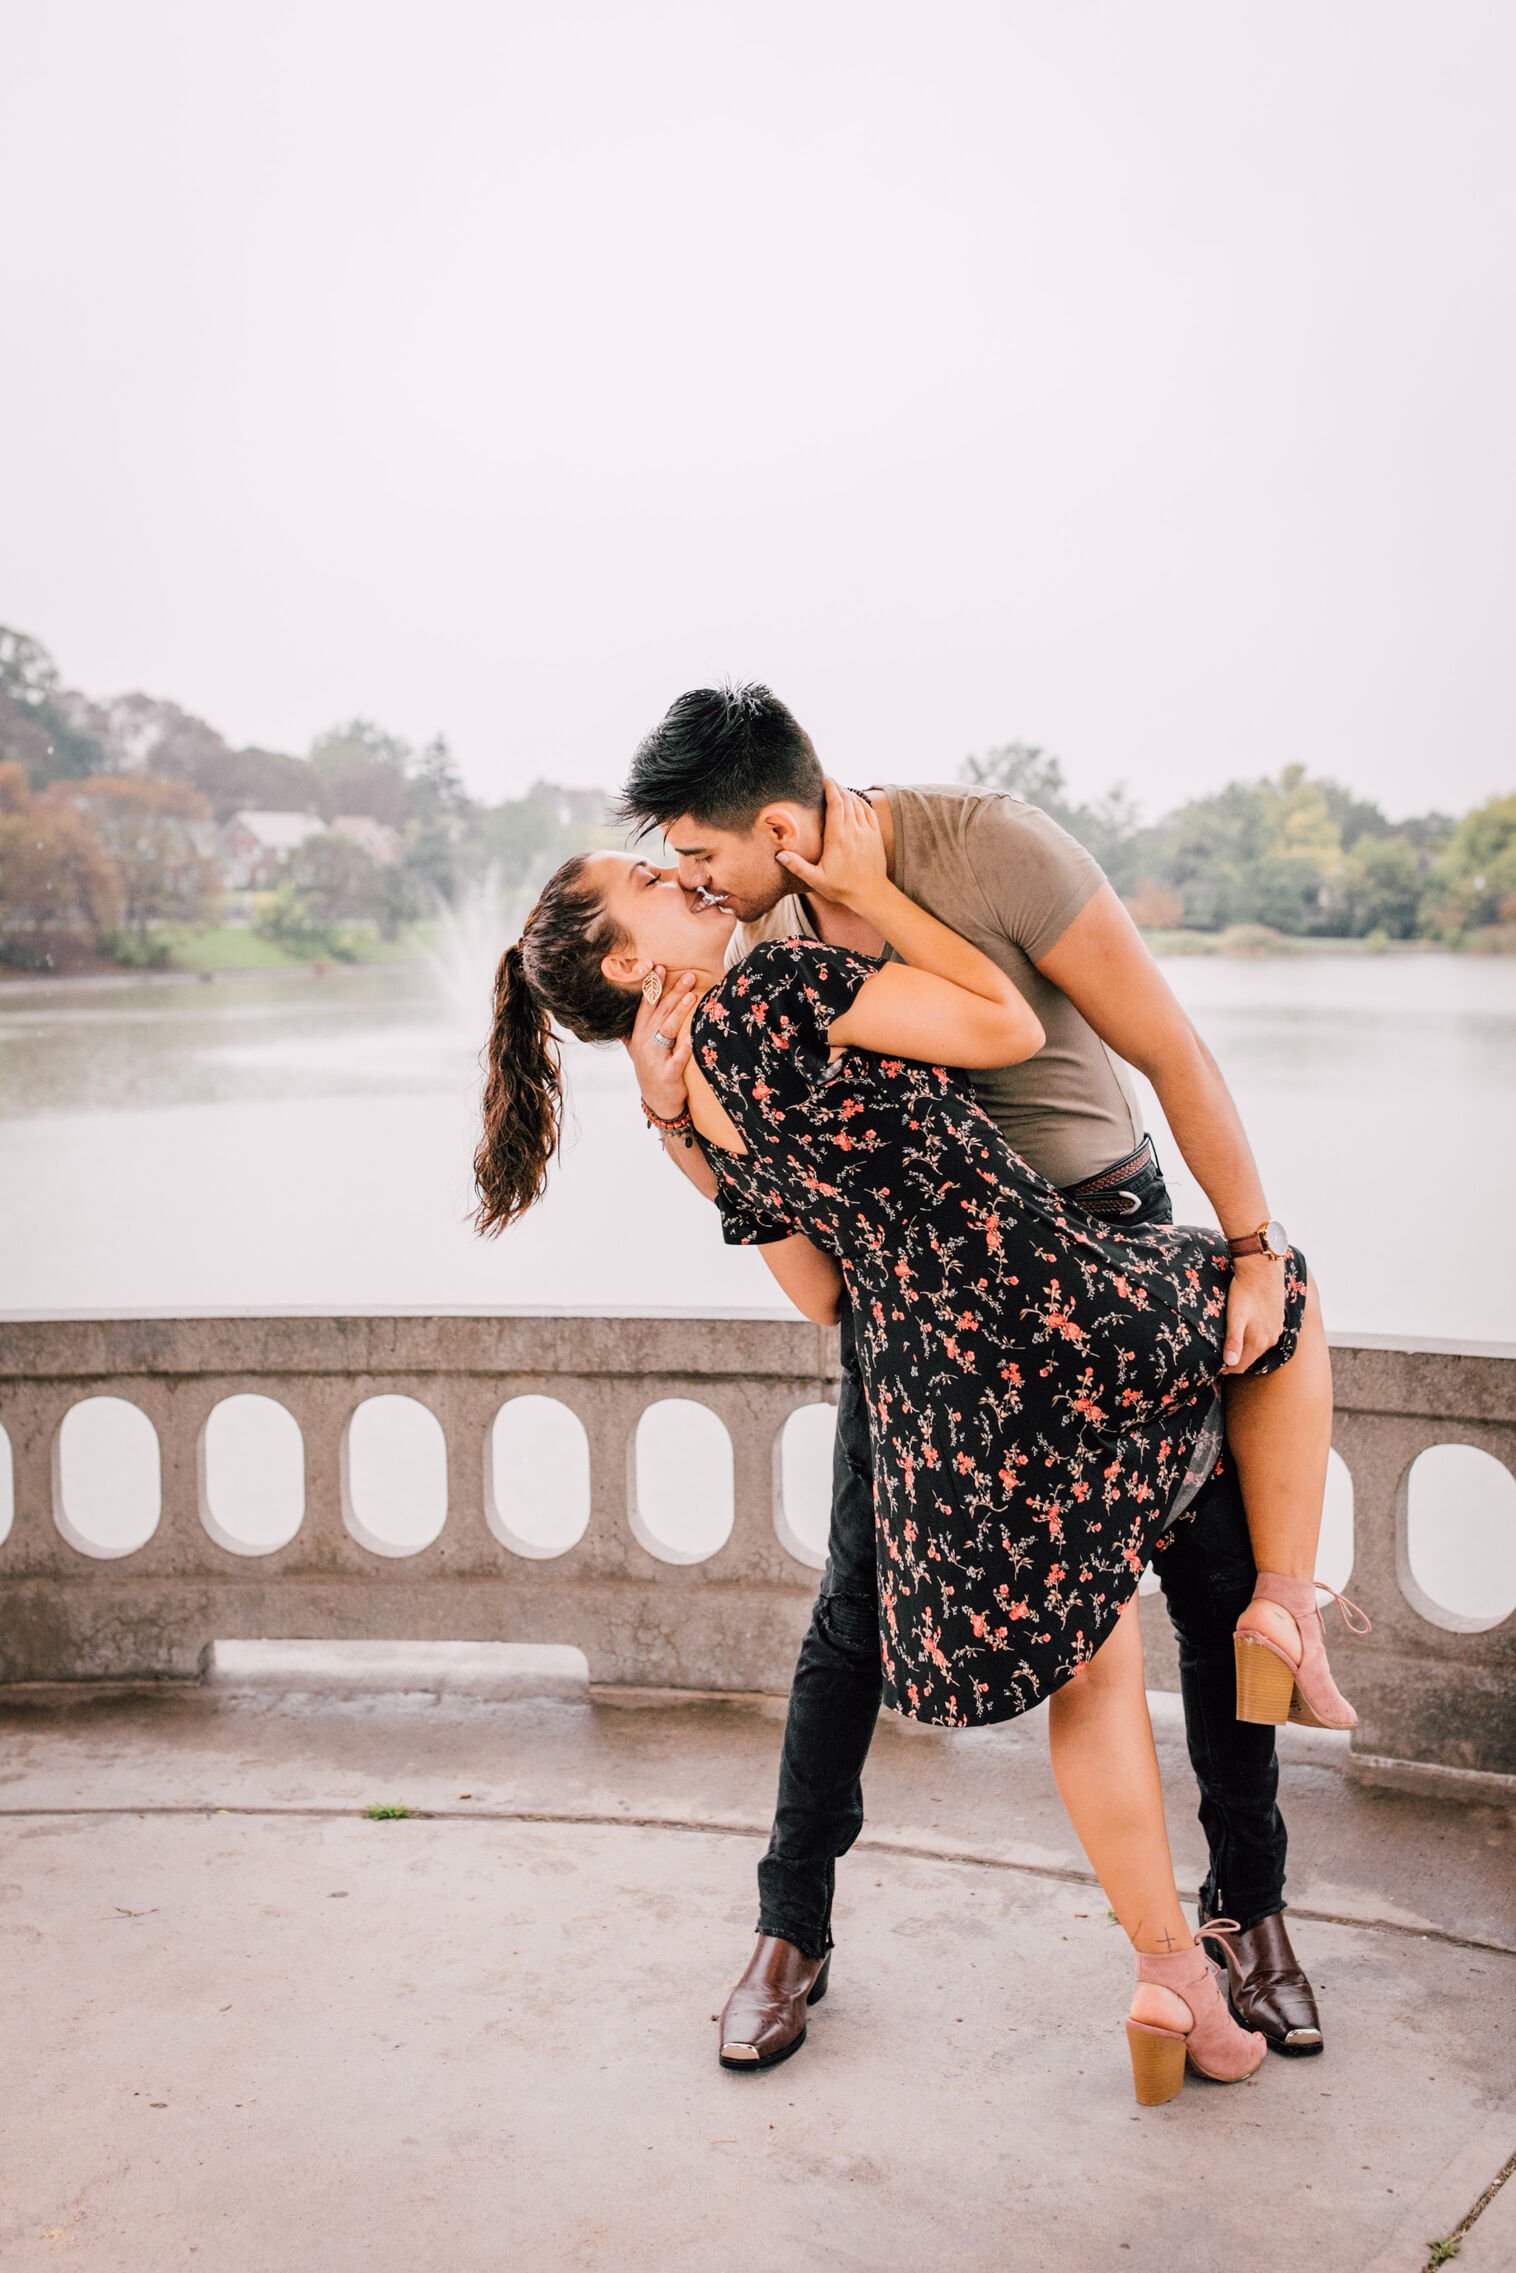  jessica and pablo kiss as they dance under a gazebo in front of a lake during their romantic photoshoot 